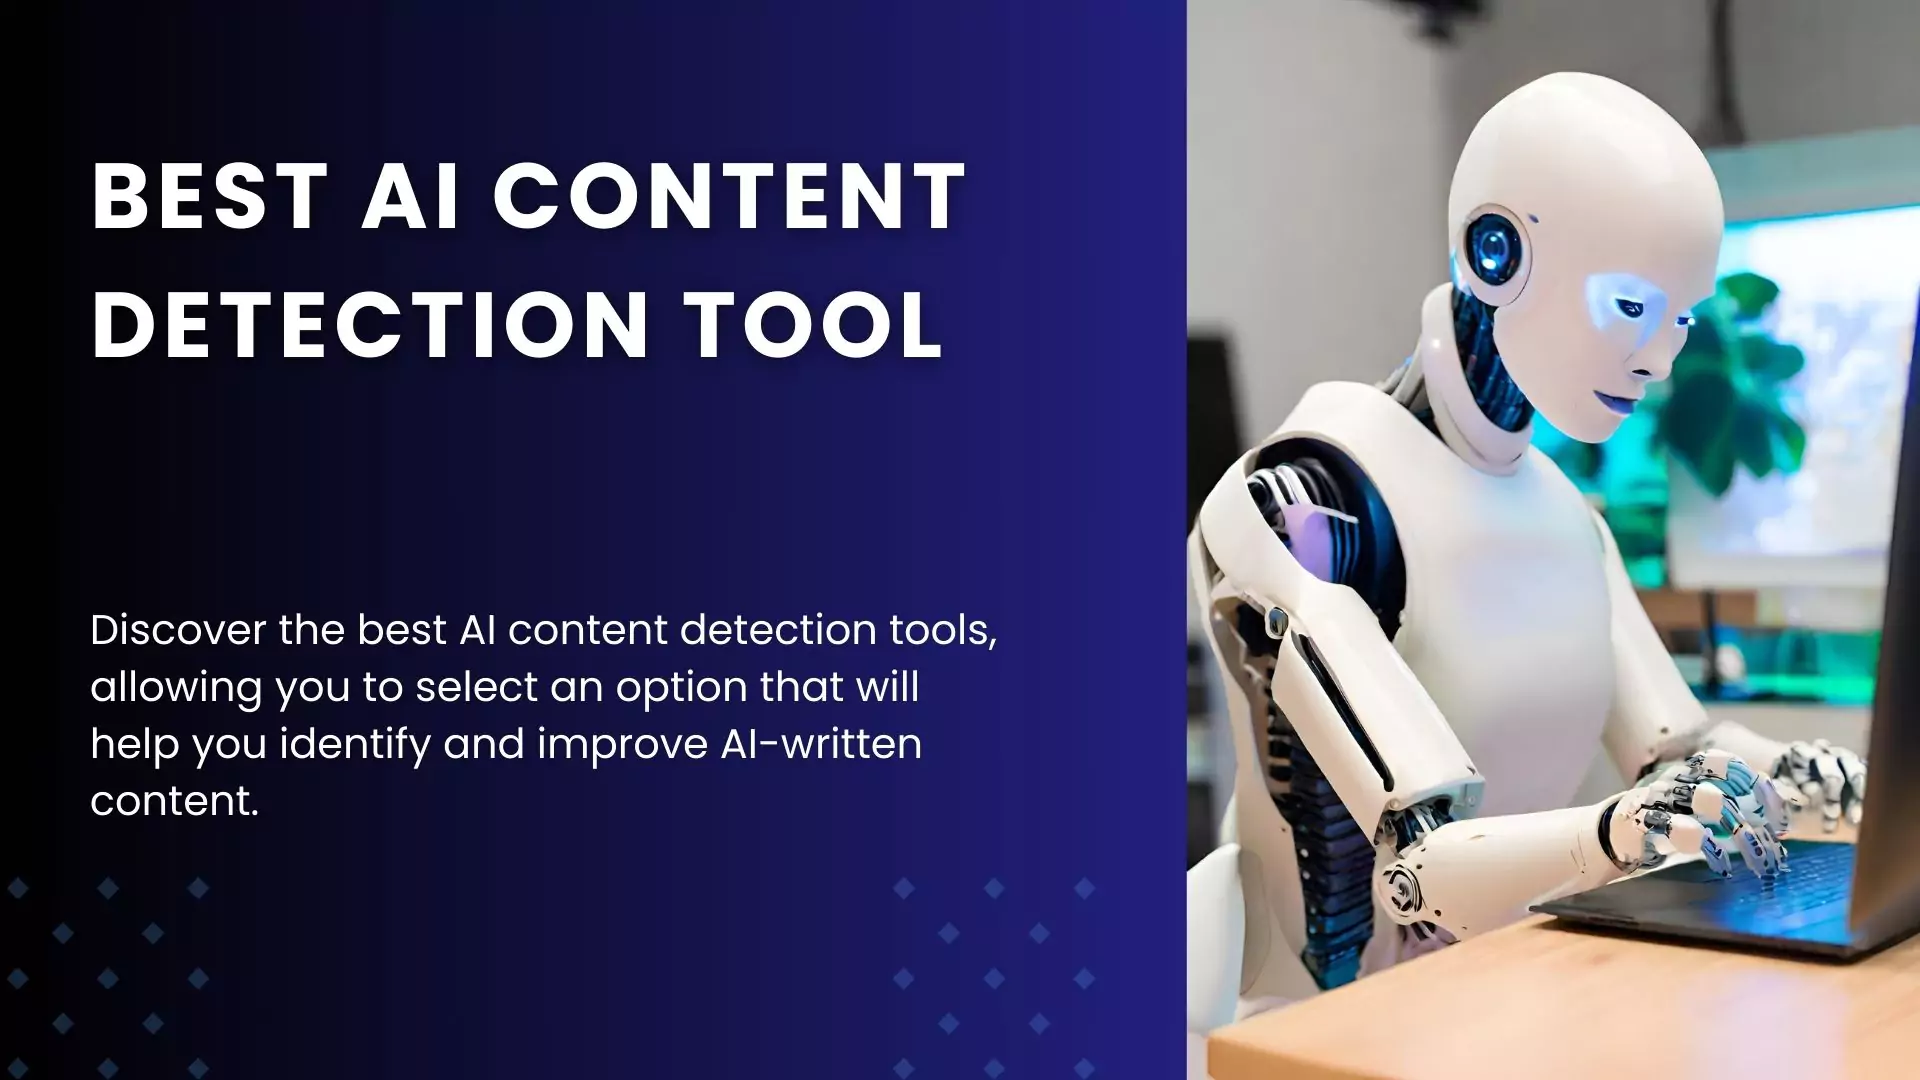 Featured image. AI content detection tools